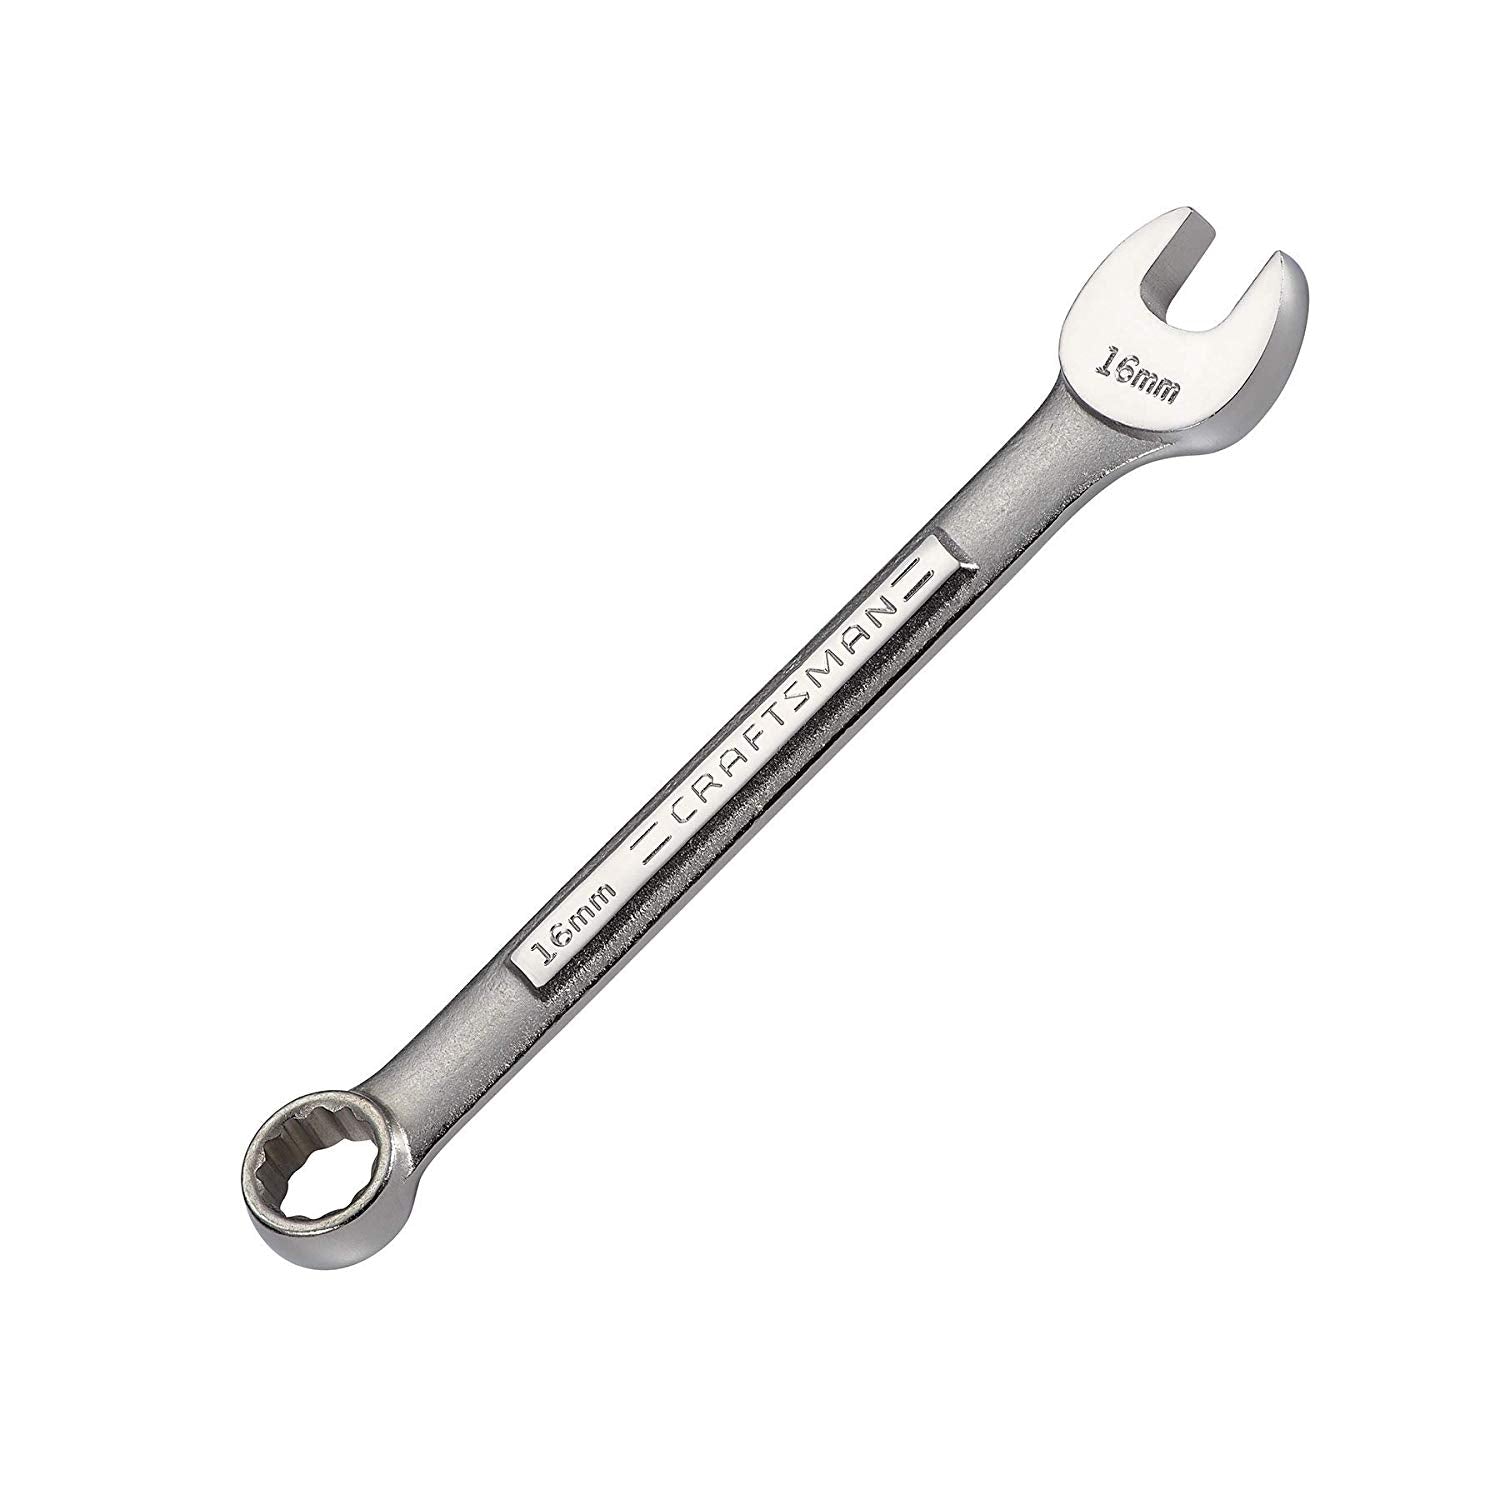 Craftsman 42924 16mm 12 Point Combination Wrench USA (DC)